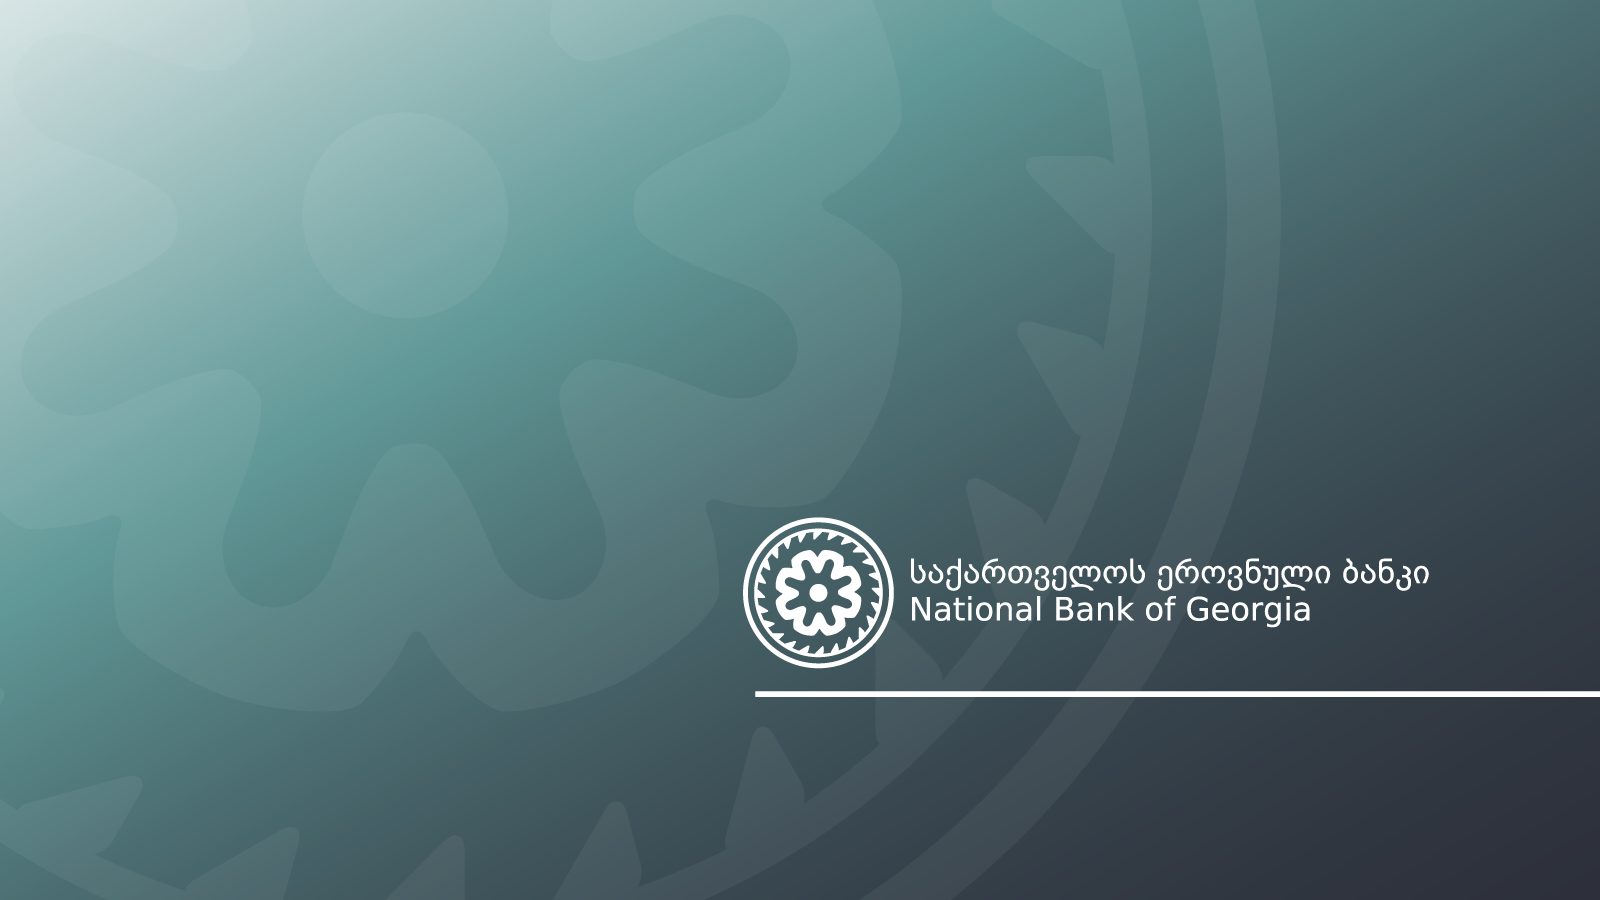 IMF Executive Board Completes the Third Review of the Extended Arrangement under the Extended Fund Facility for Georgia